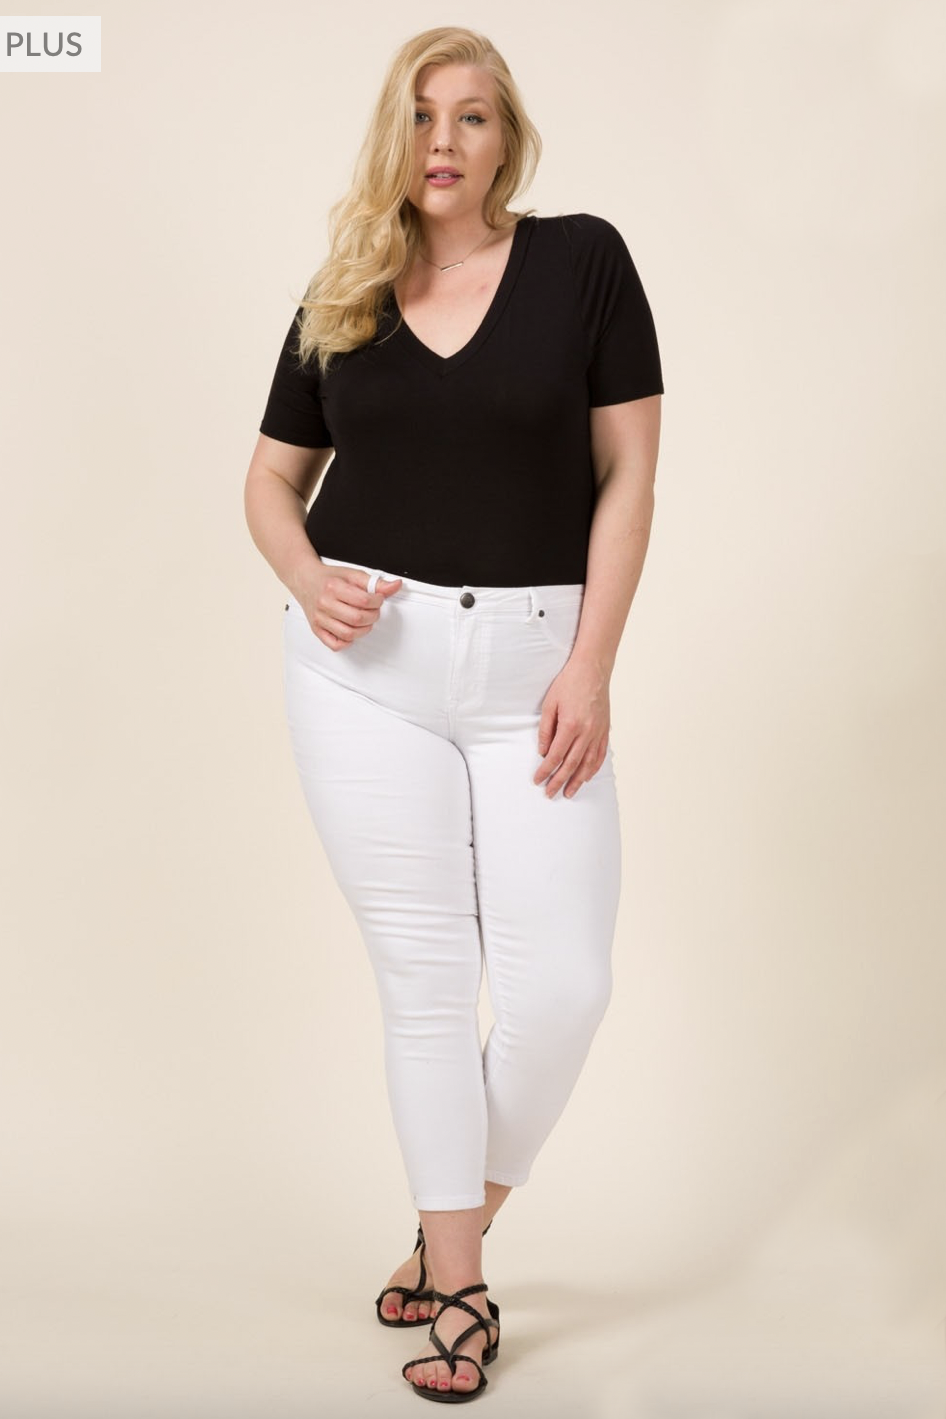 Load image into Gallery viewer, Glow Fashion Boutique Plus Size Bodysuit
